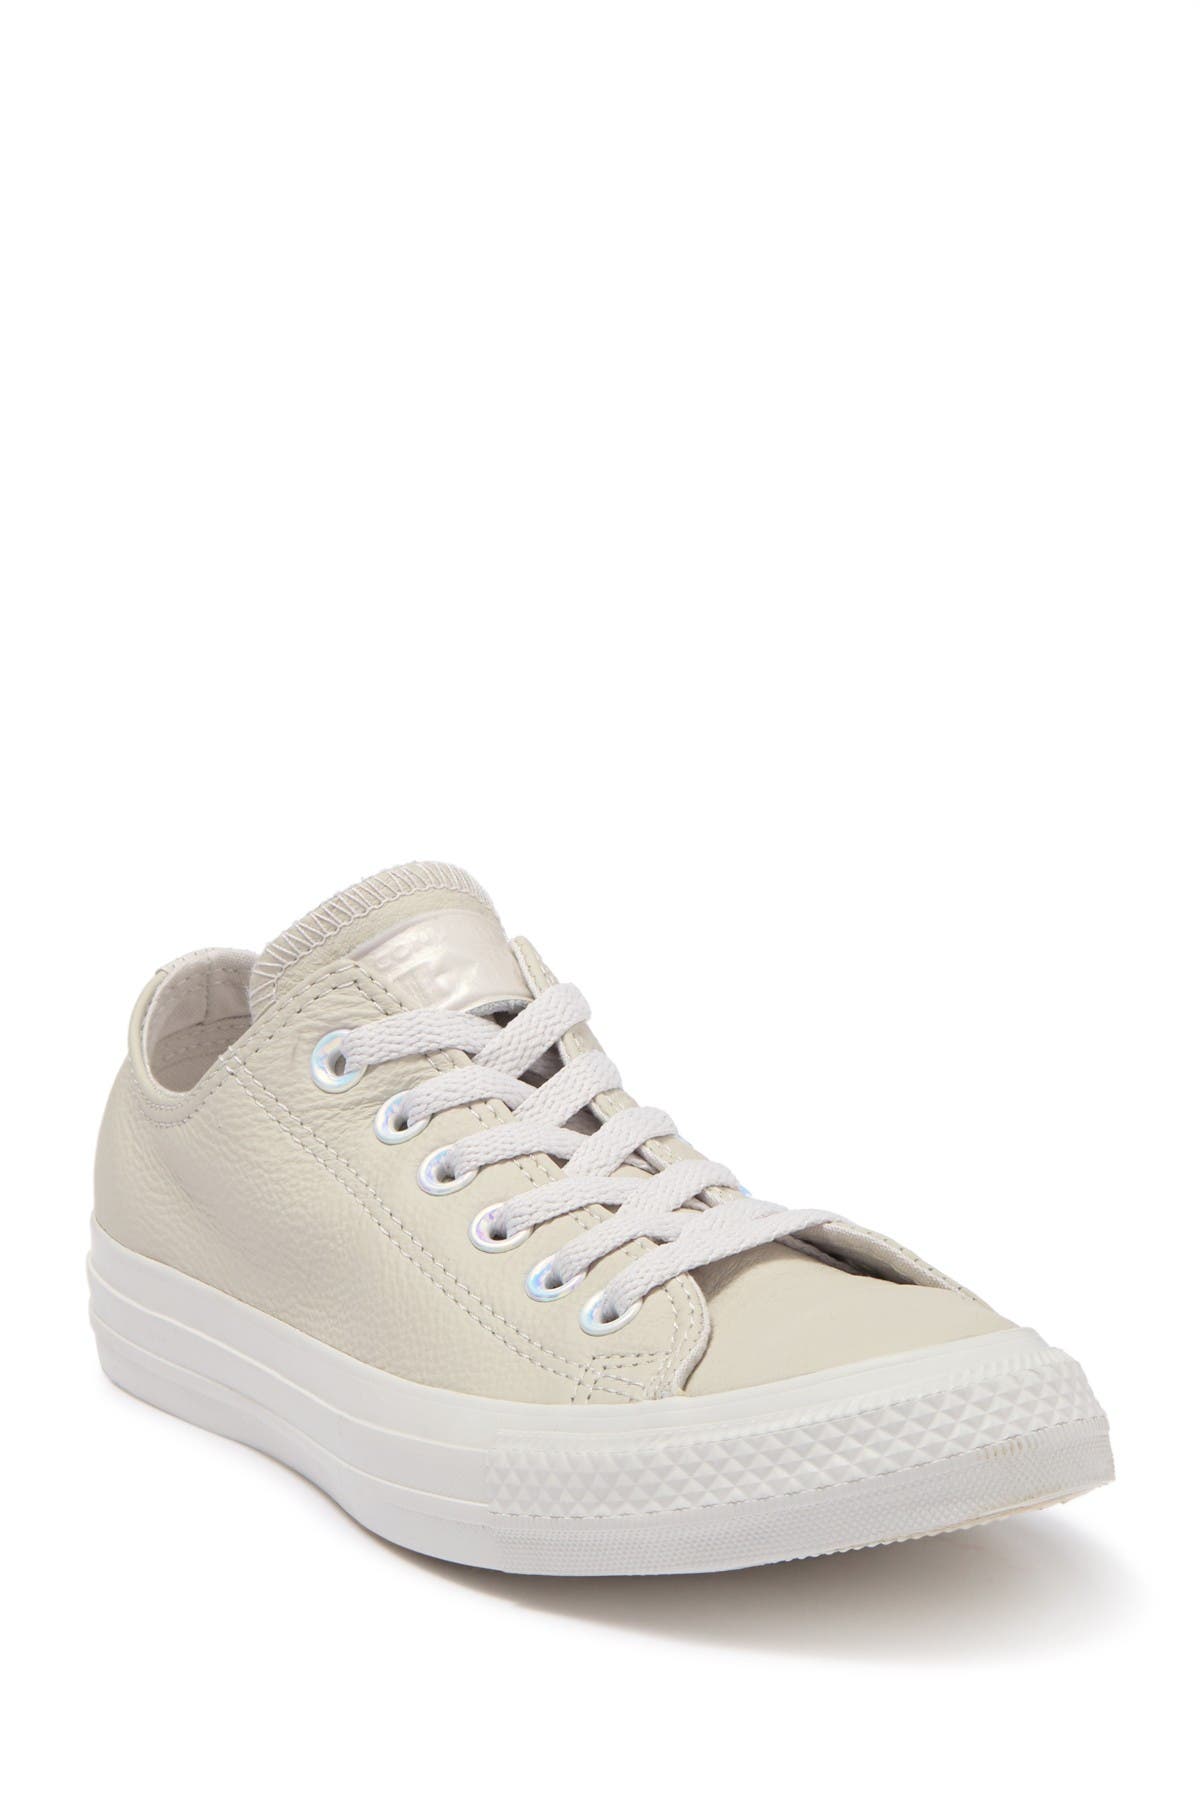 converse leather nordstrom